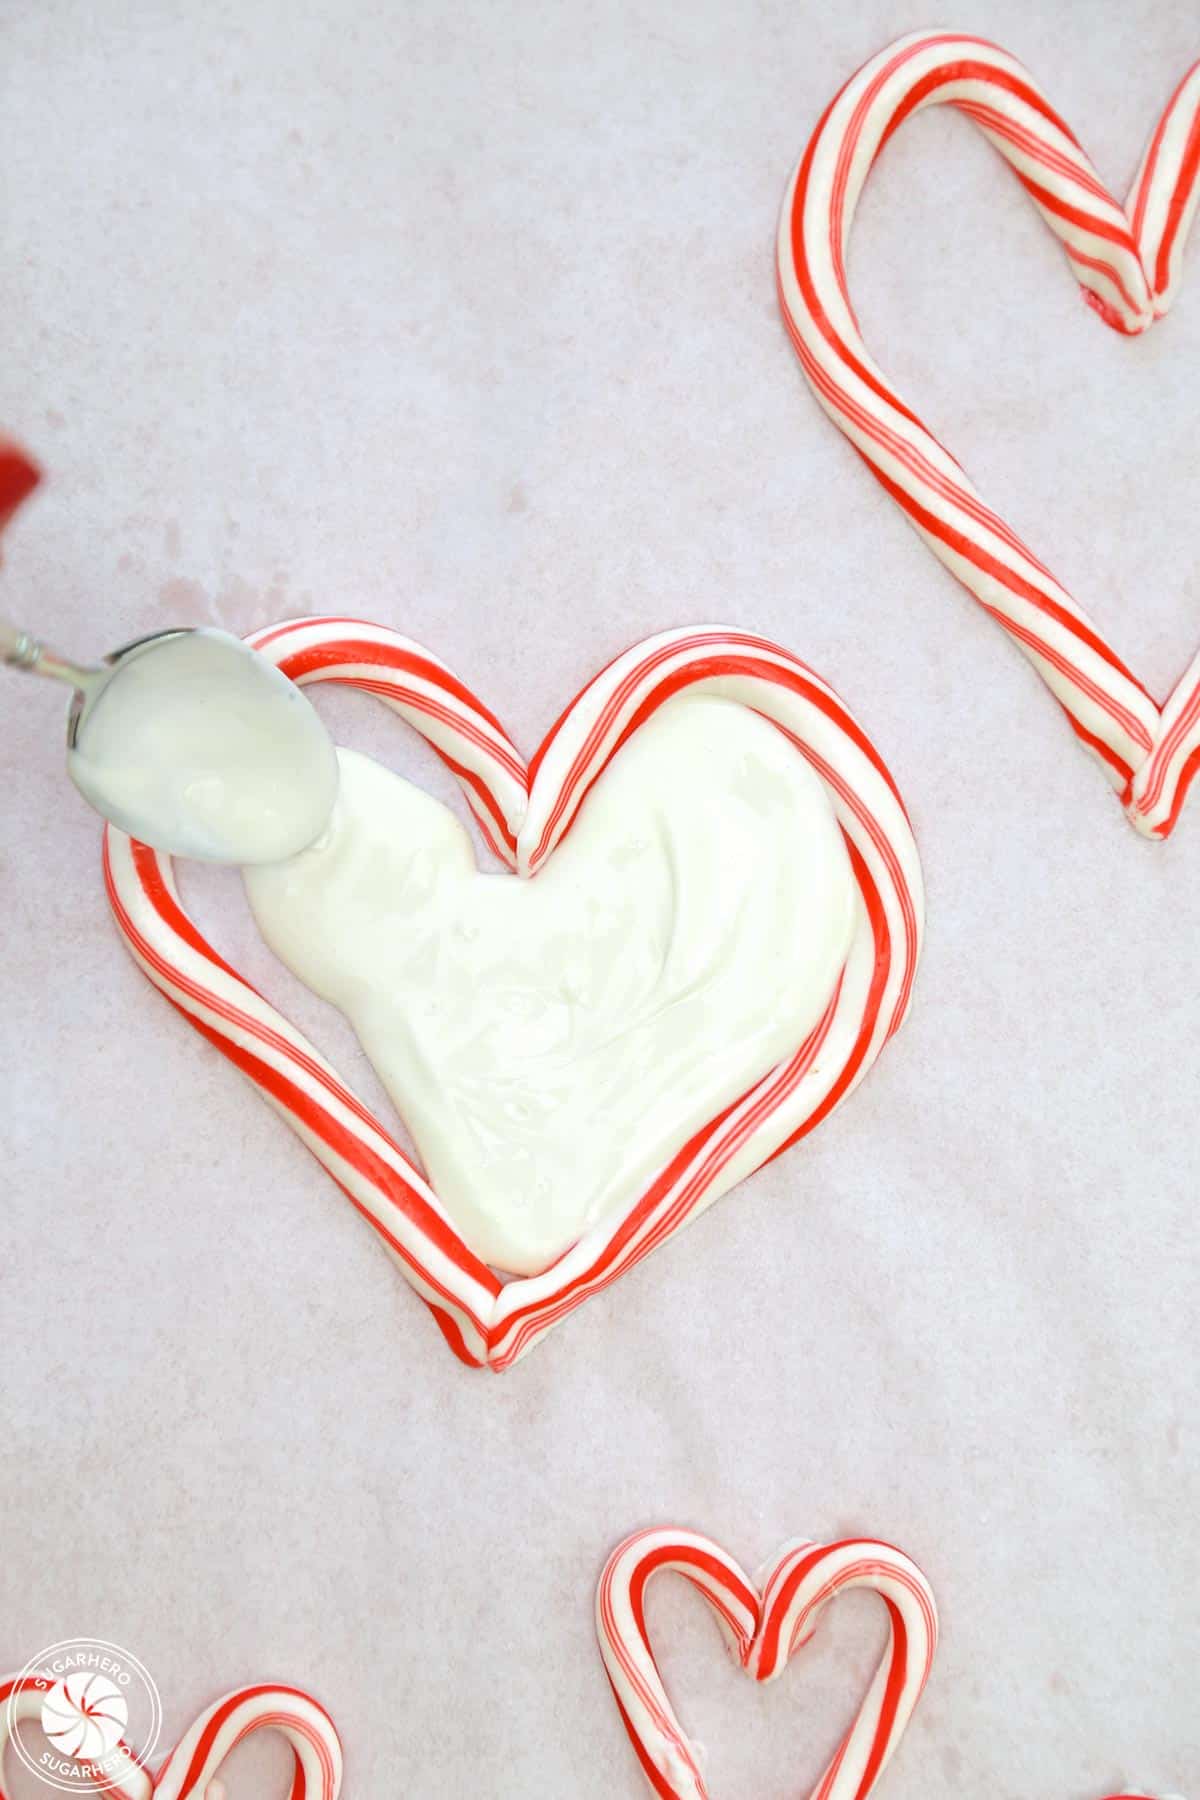 Spreading white chocolate on the inside of a heart-shaped candy cane.